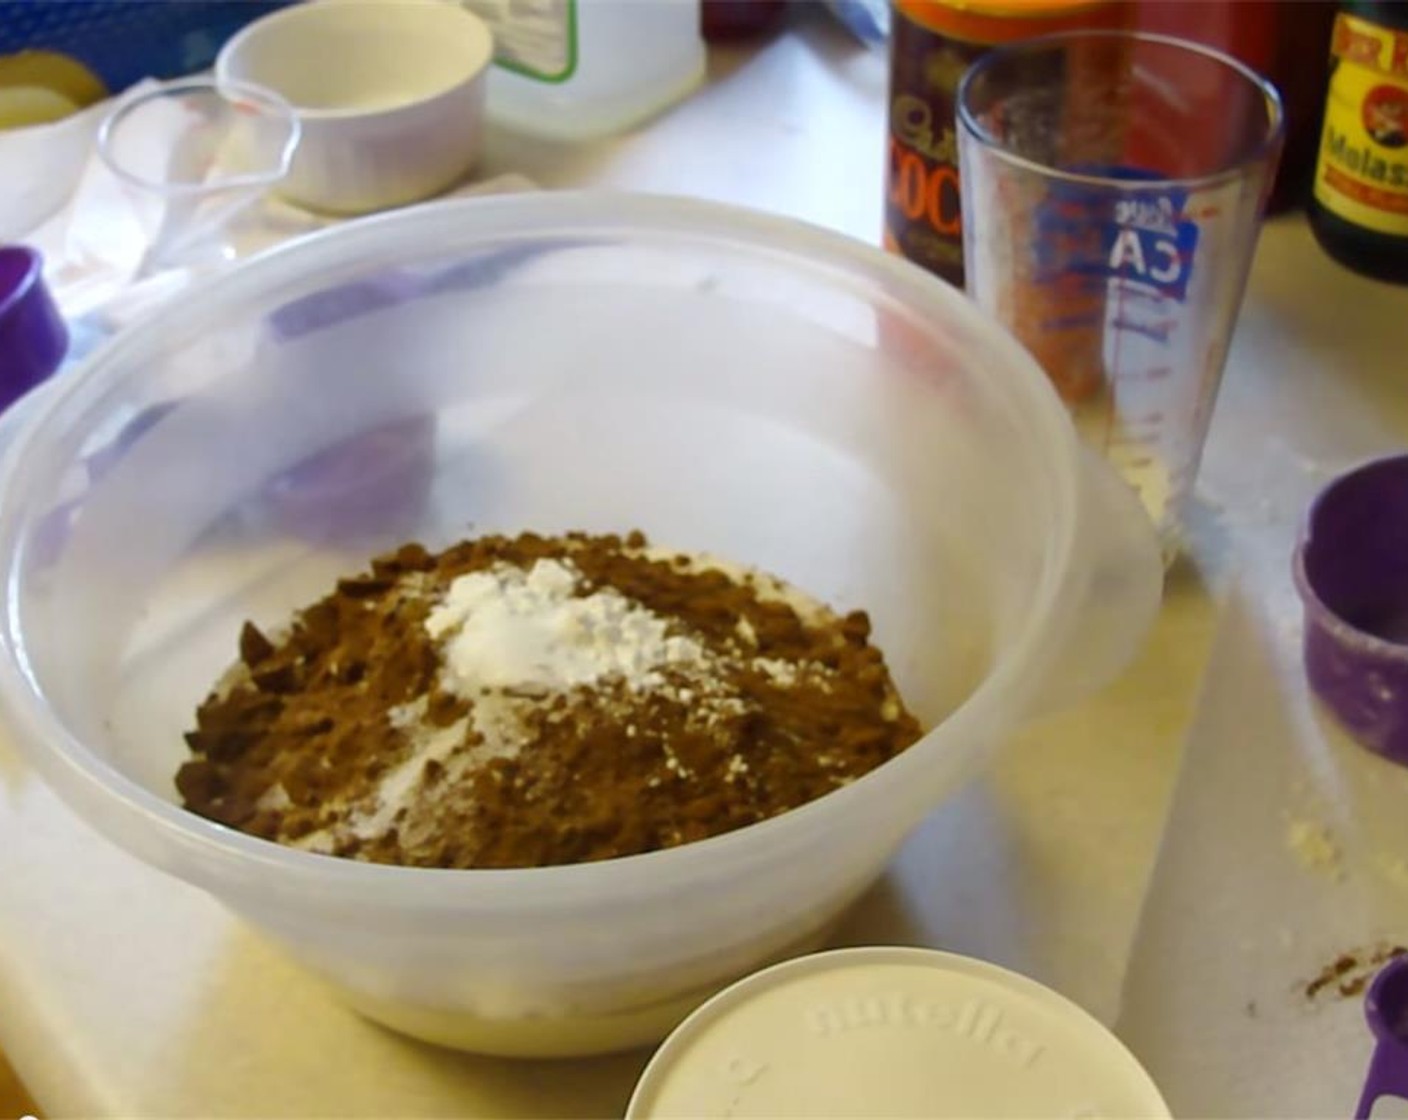 step 2 In a large bowl, stir together the All-Purpose Flour (2 cups), Granulated Sugar (1 3/4 cups), Unsweetened Cocoa Powder (1 cup), Baking Powder (1 tsp), and Salt (1/2 tsp).